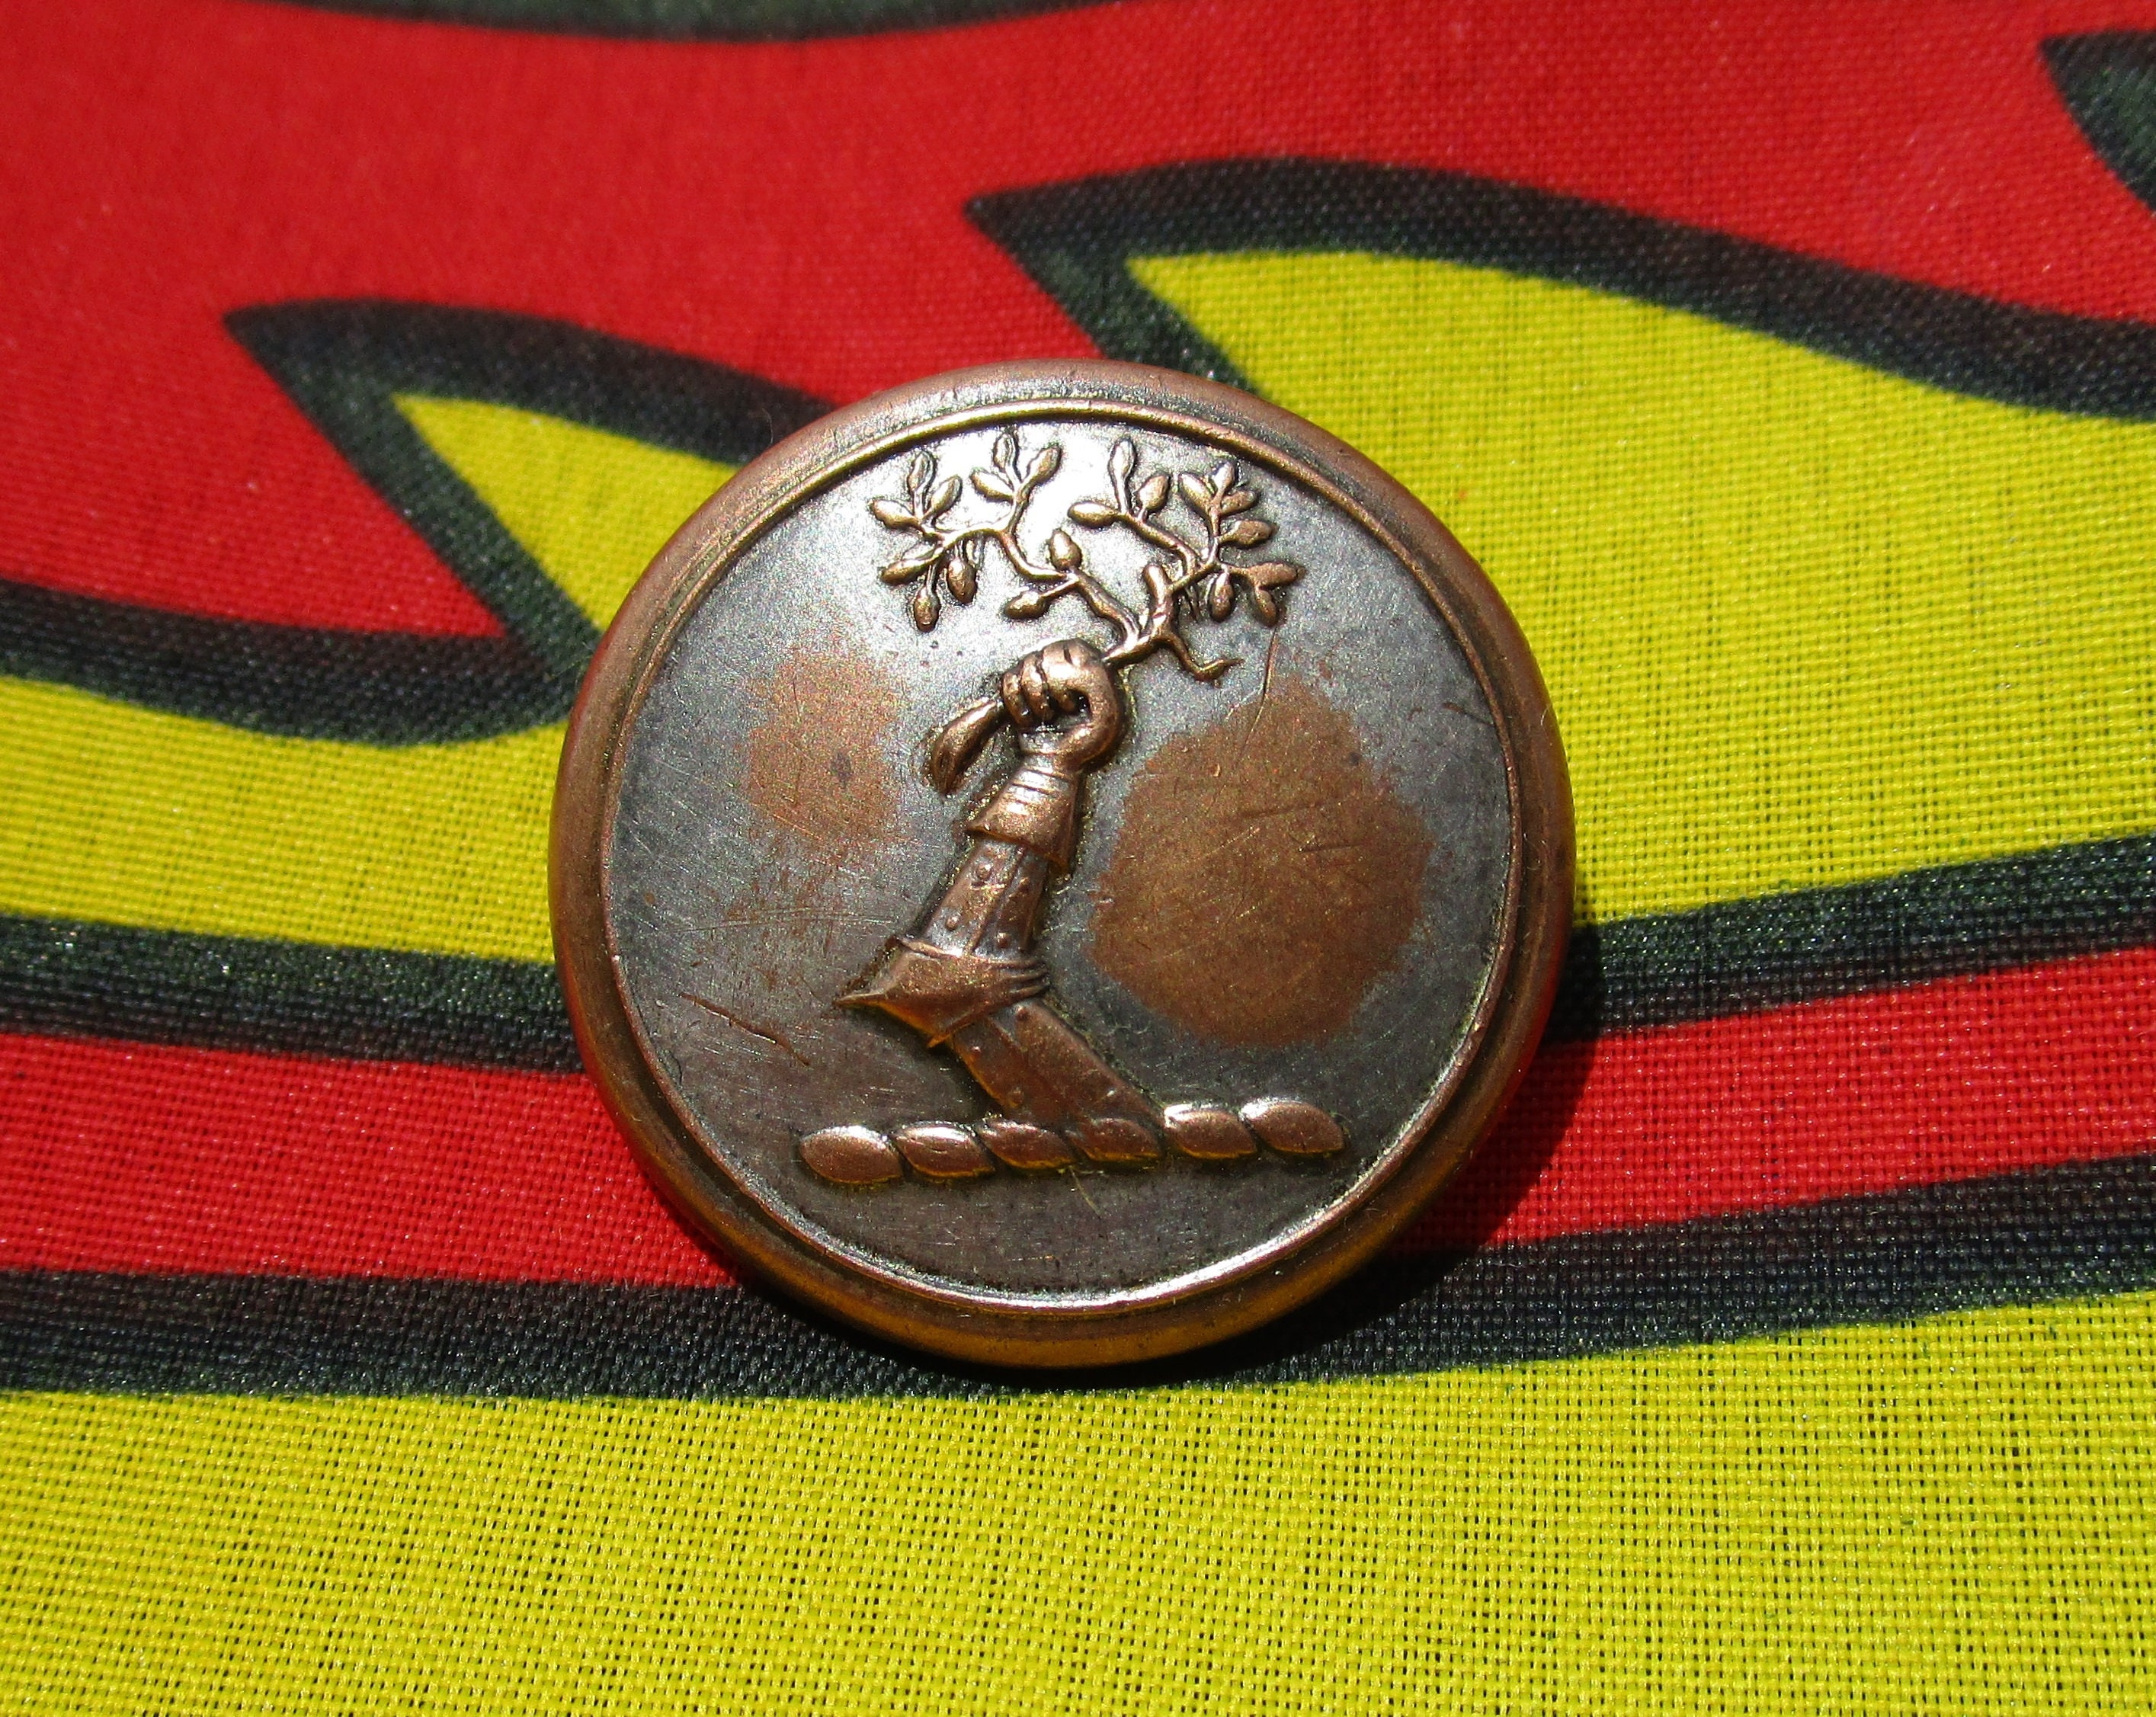 Antique Livery Button of an Arm Holding a Wreath of Laurel - Etsy